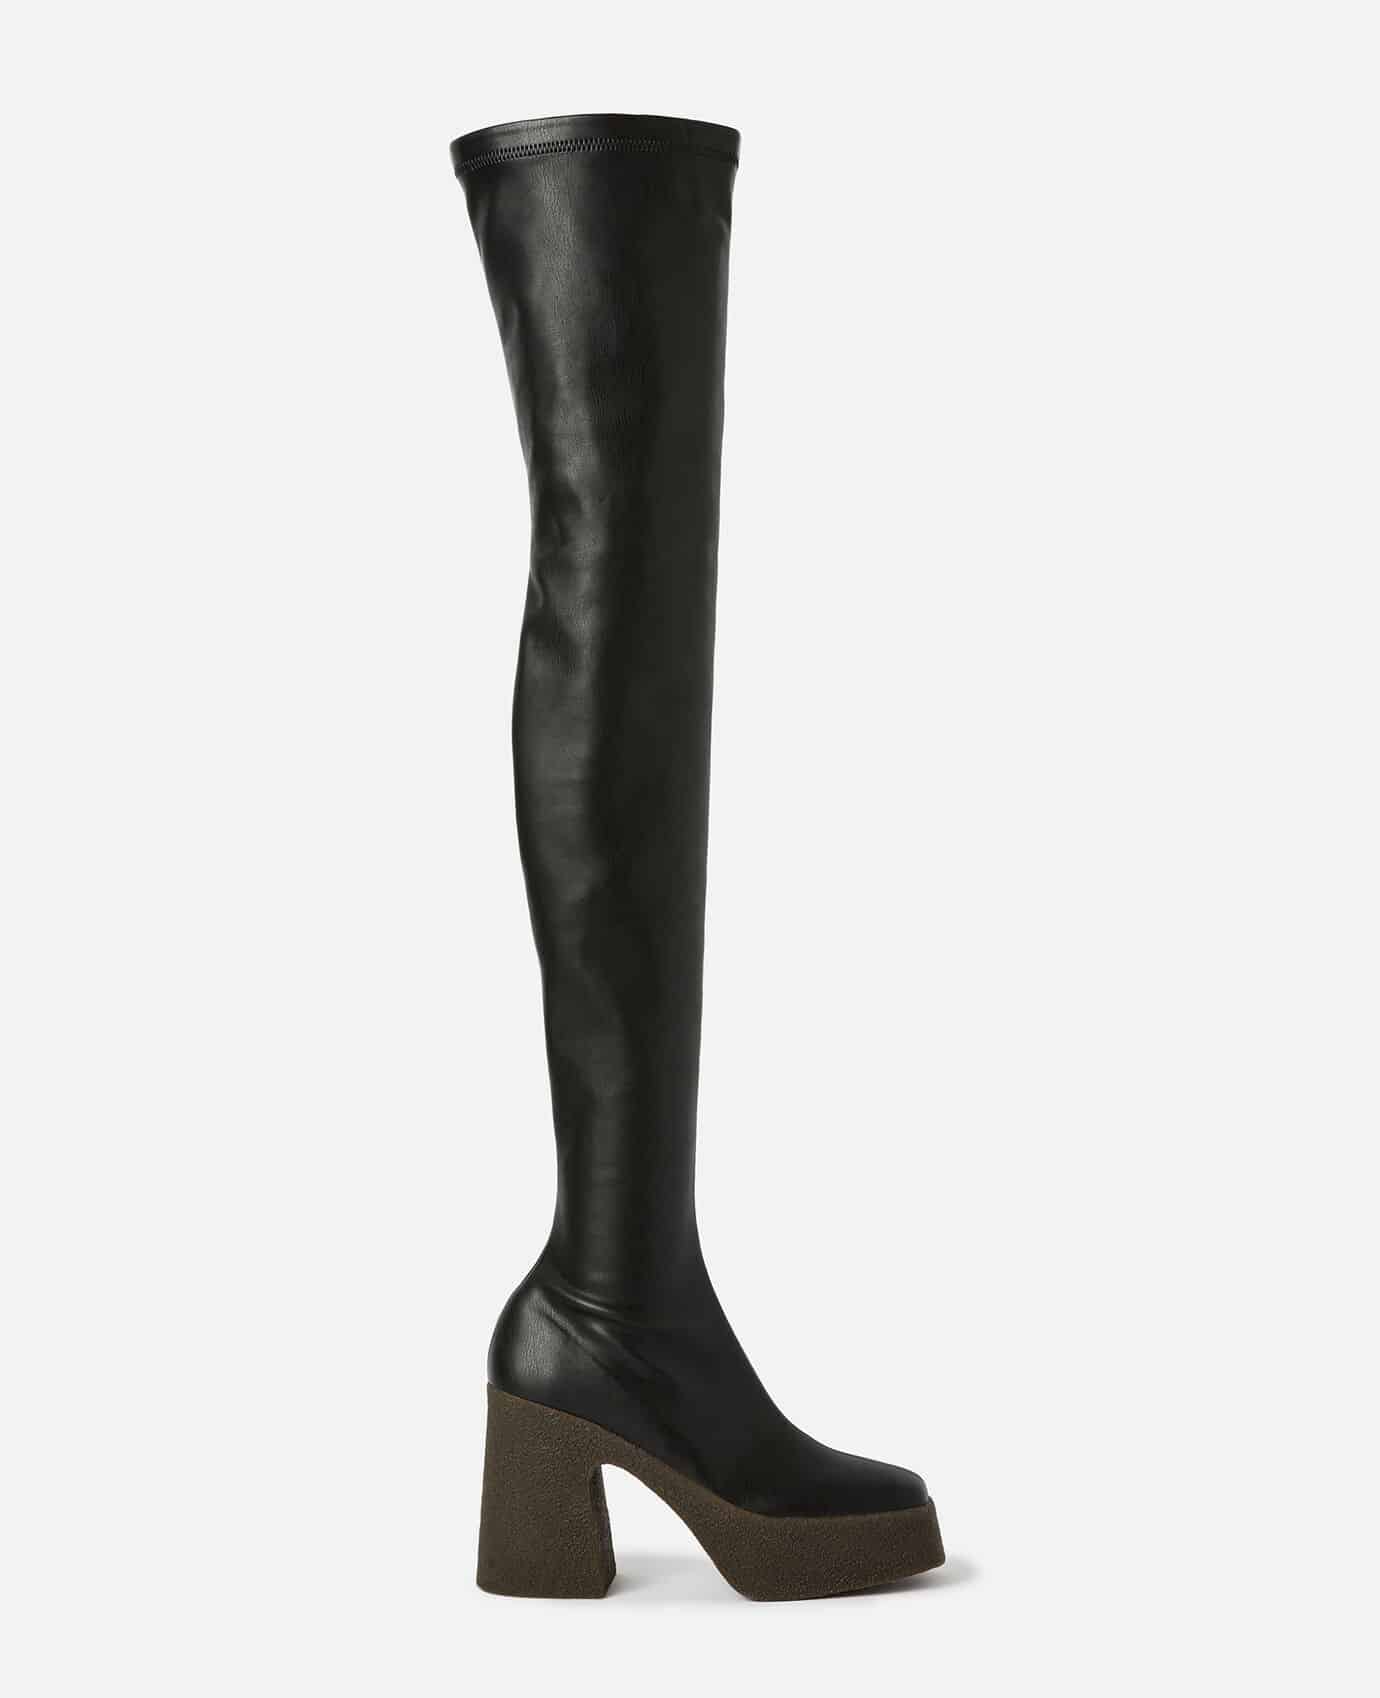 Black vegan leather over the knee boots with chunky heel